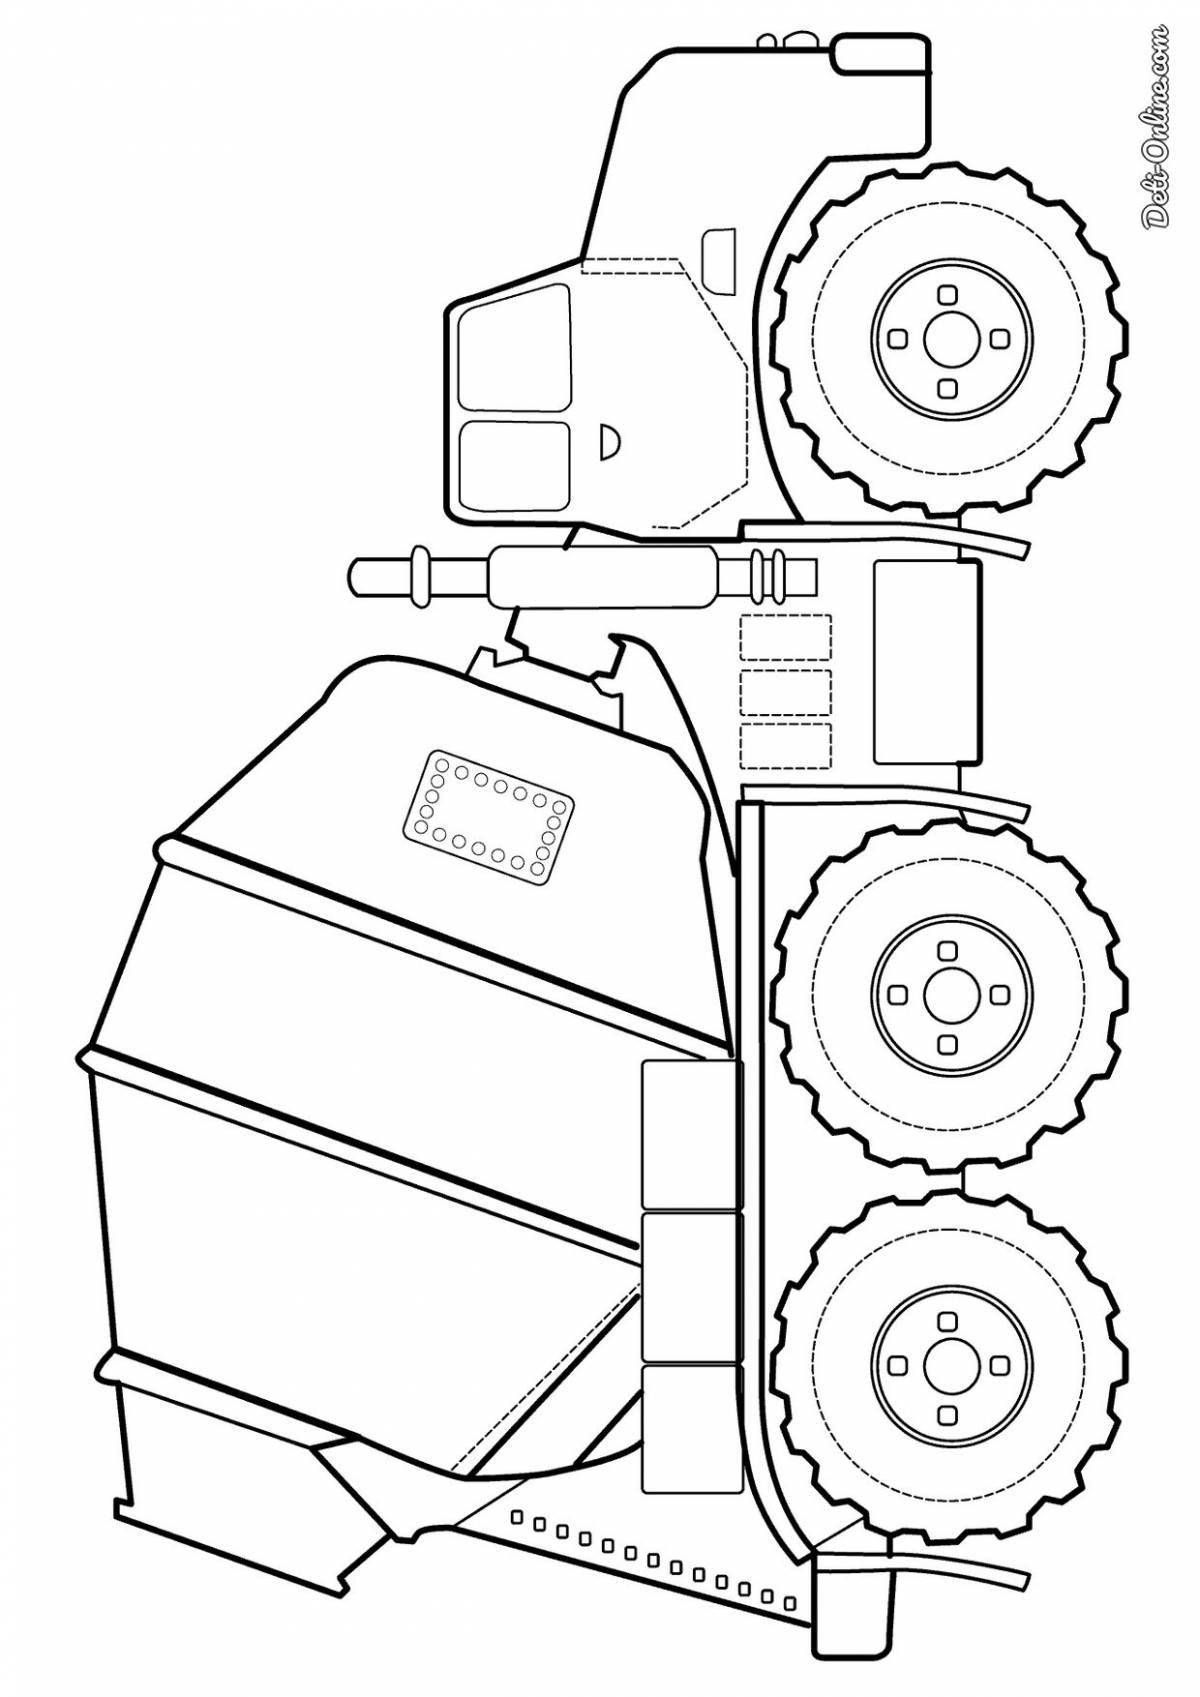 Inviting concrete mixer coloring book for kids